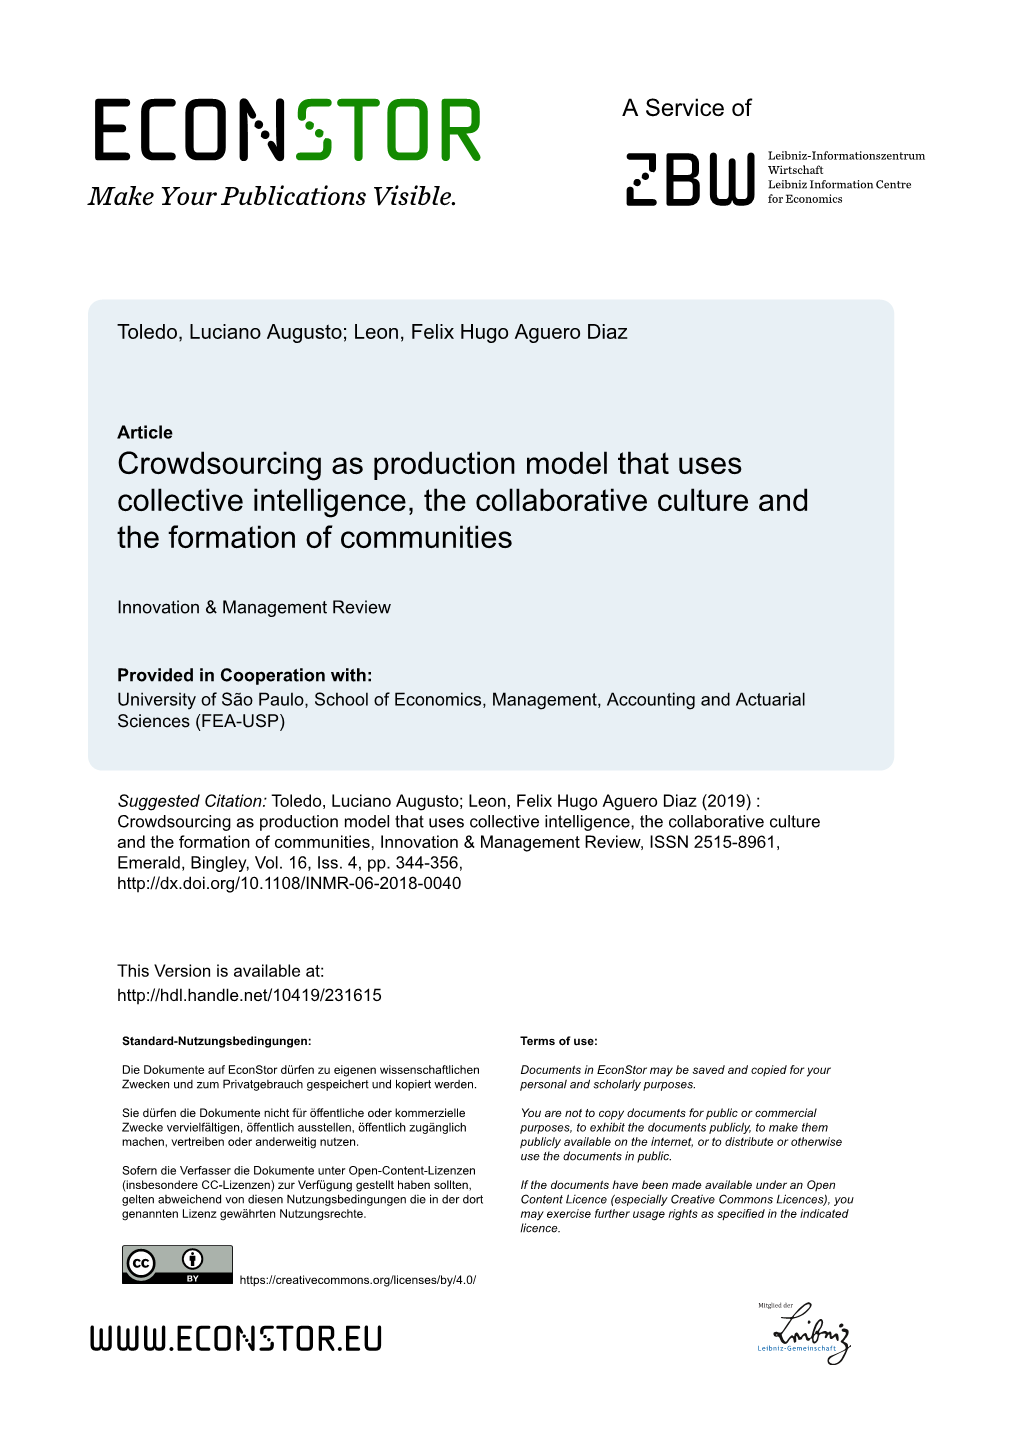 Crowdsourcing As Production Model That Uses Collective Intelligence, the Collaborative Culture and the Formation of Communities